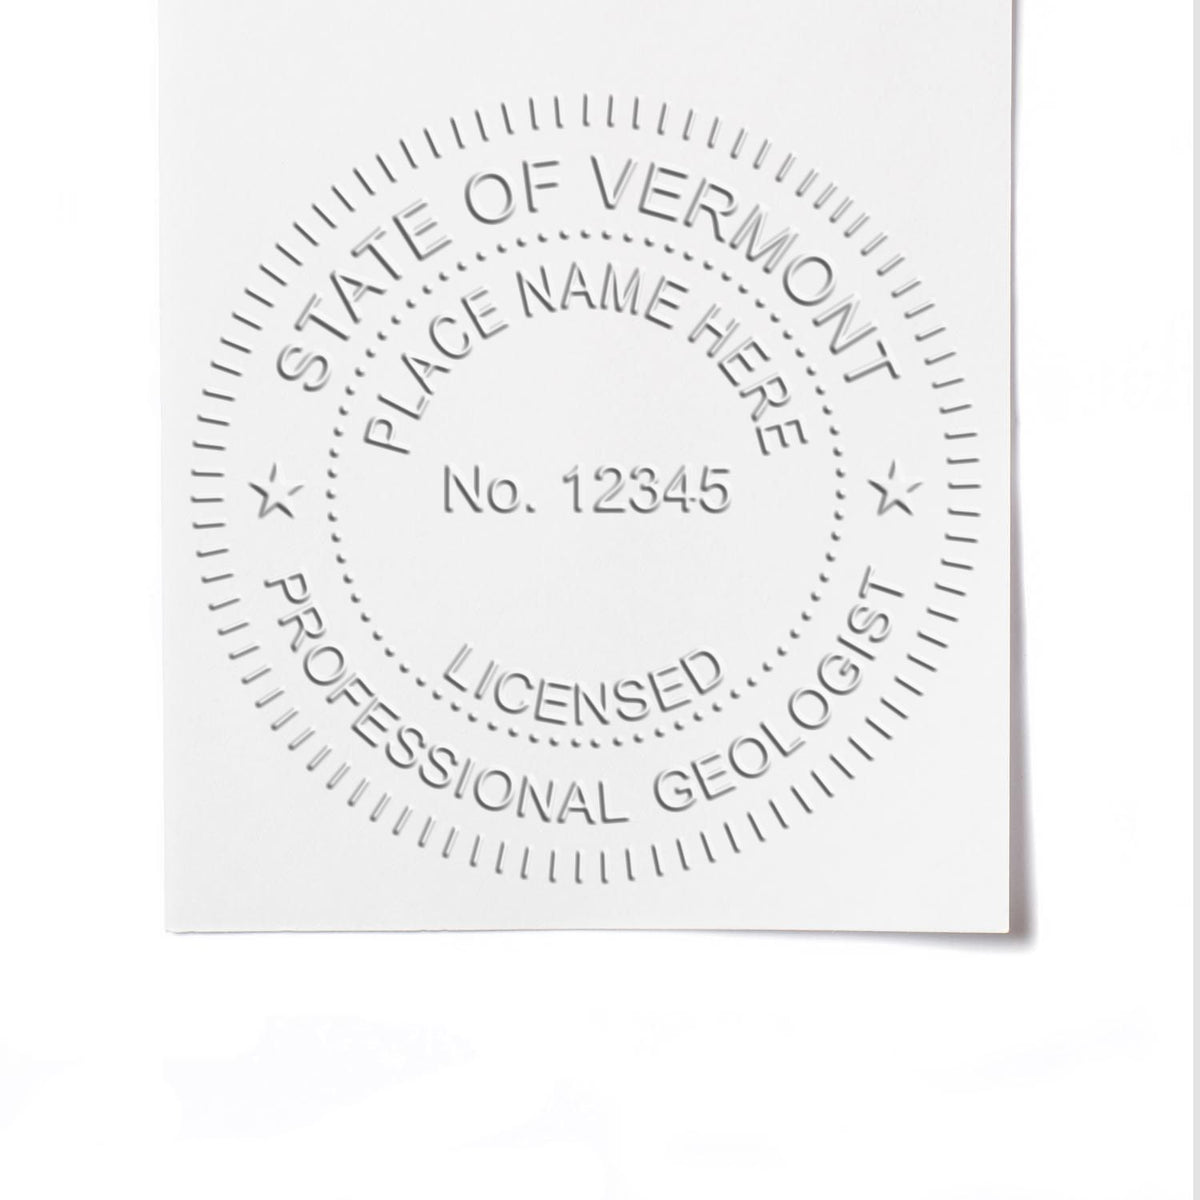 An in use photo of the Hybrid Vermont Geologist Seal showing a sample imprint on a cardstock